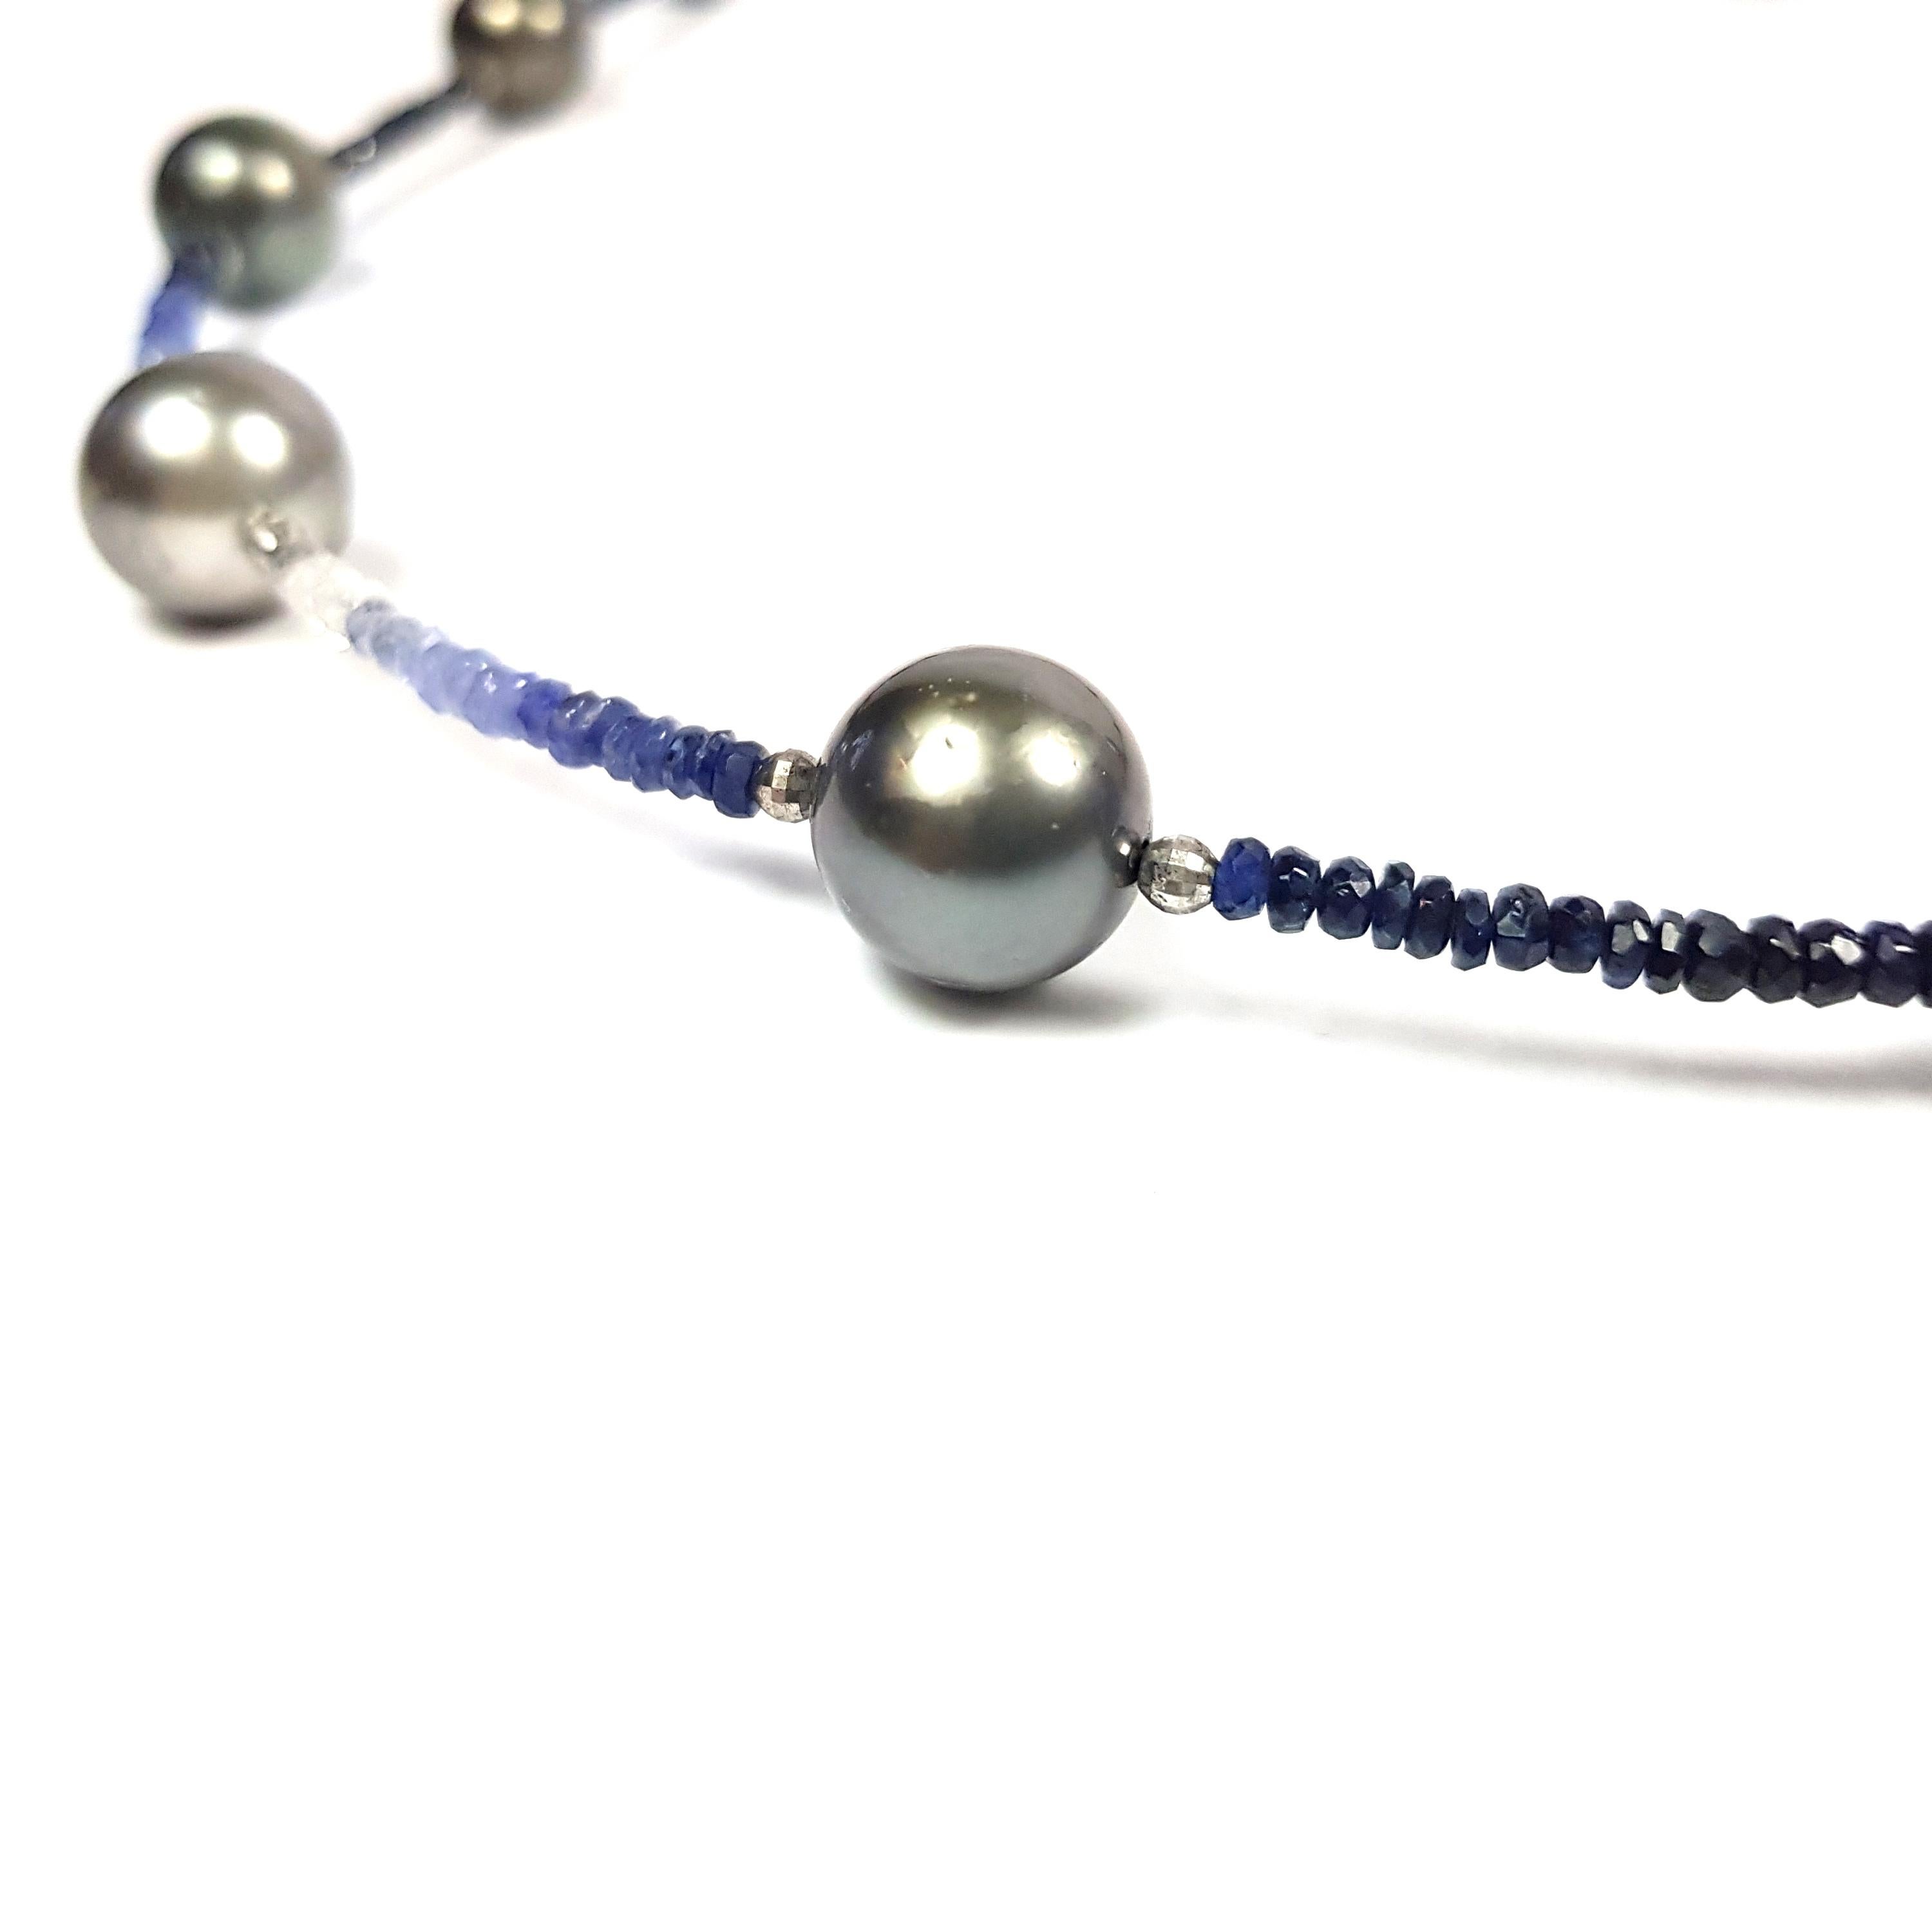 Fei Liu Fine Jewellery 24 inches long Tahitian pearl (11 pcs) necklace, with beautiful hues of blue sapphires. Exotic with a refined mix of elegance. 